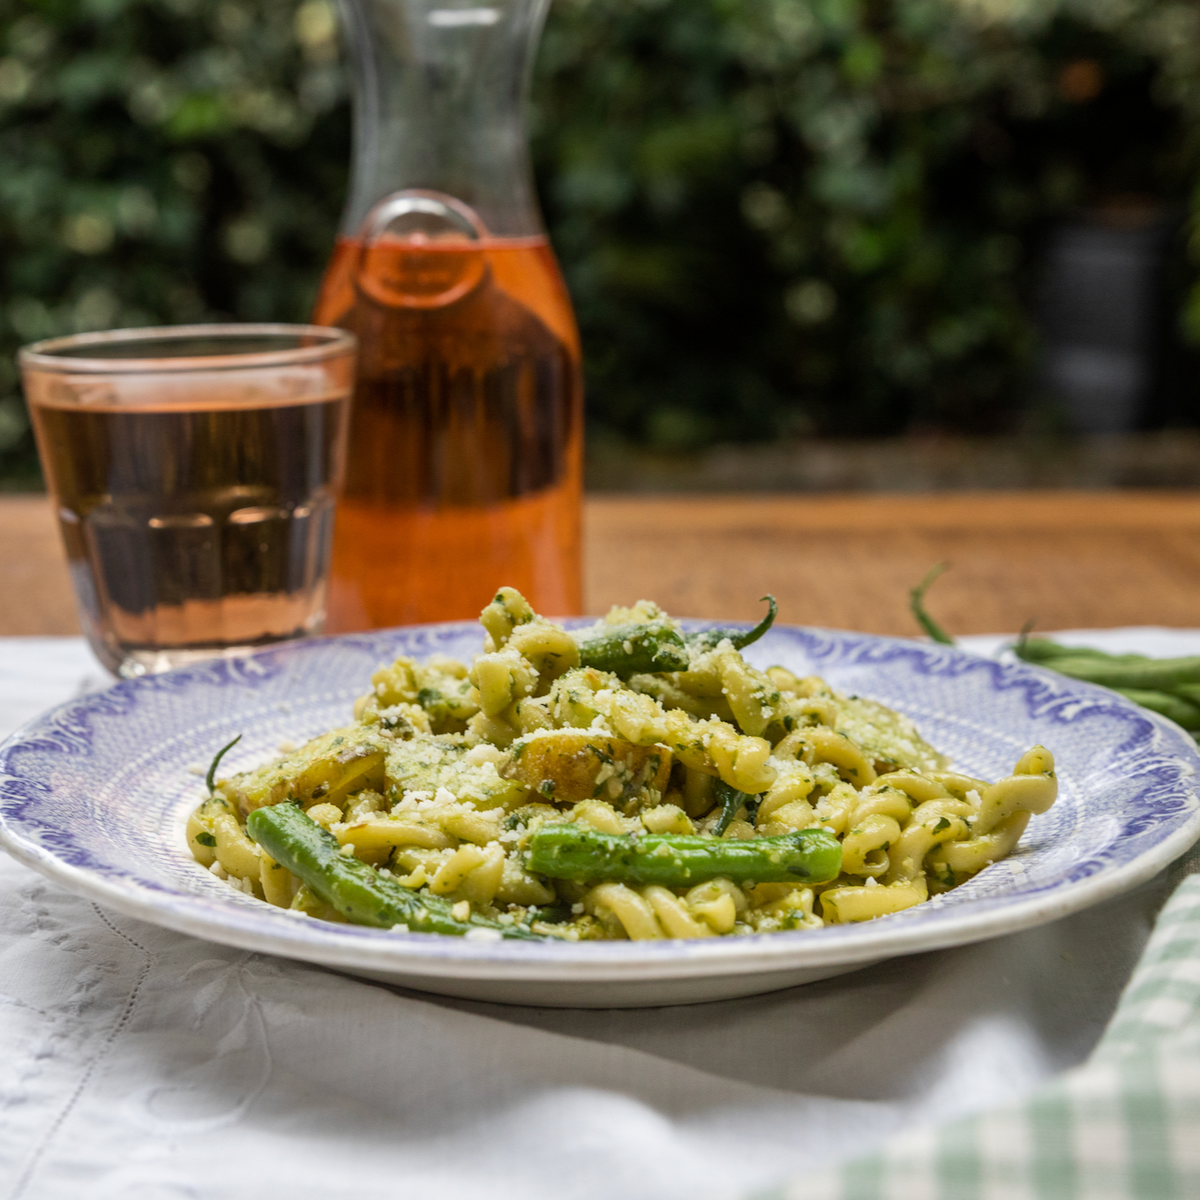 Gemilli with pesto Genovese, Jersey royals & green beans